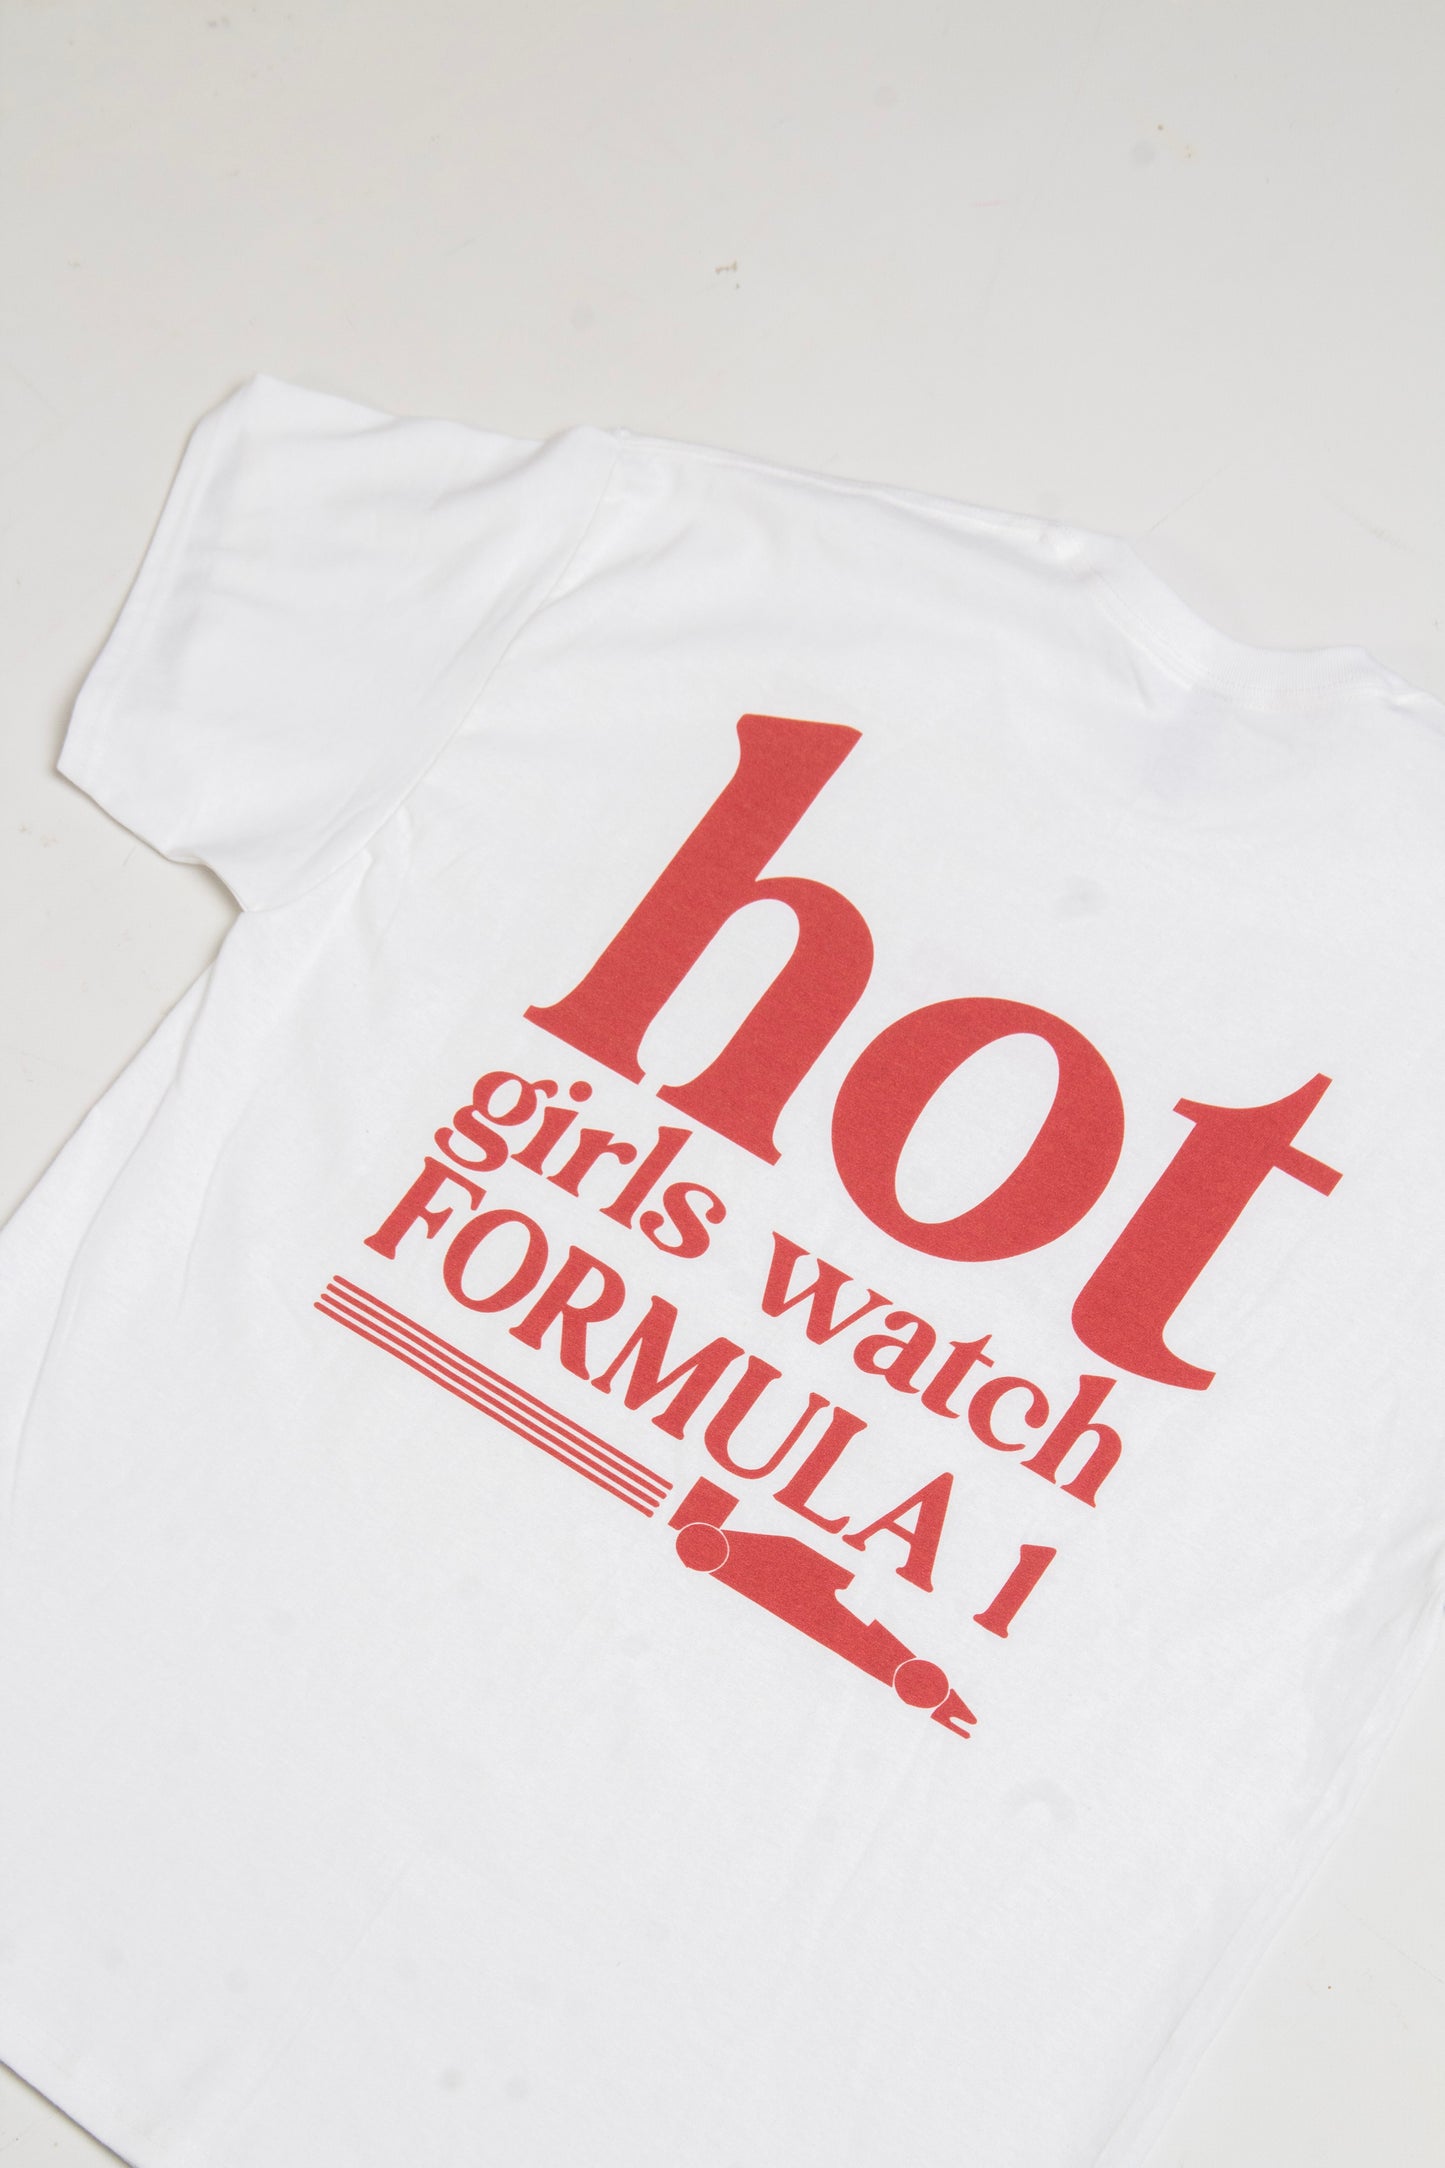 "Hot girls watch Formula 1" T-shirt Red Exclusive Edition Tee